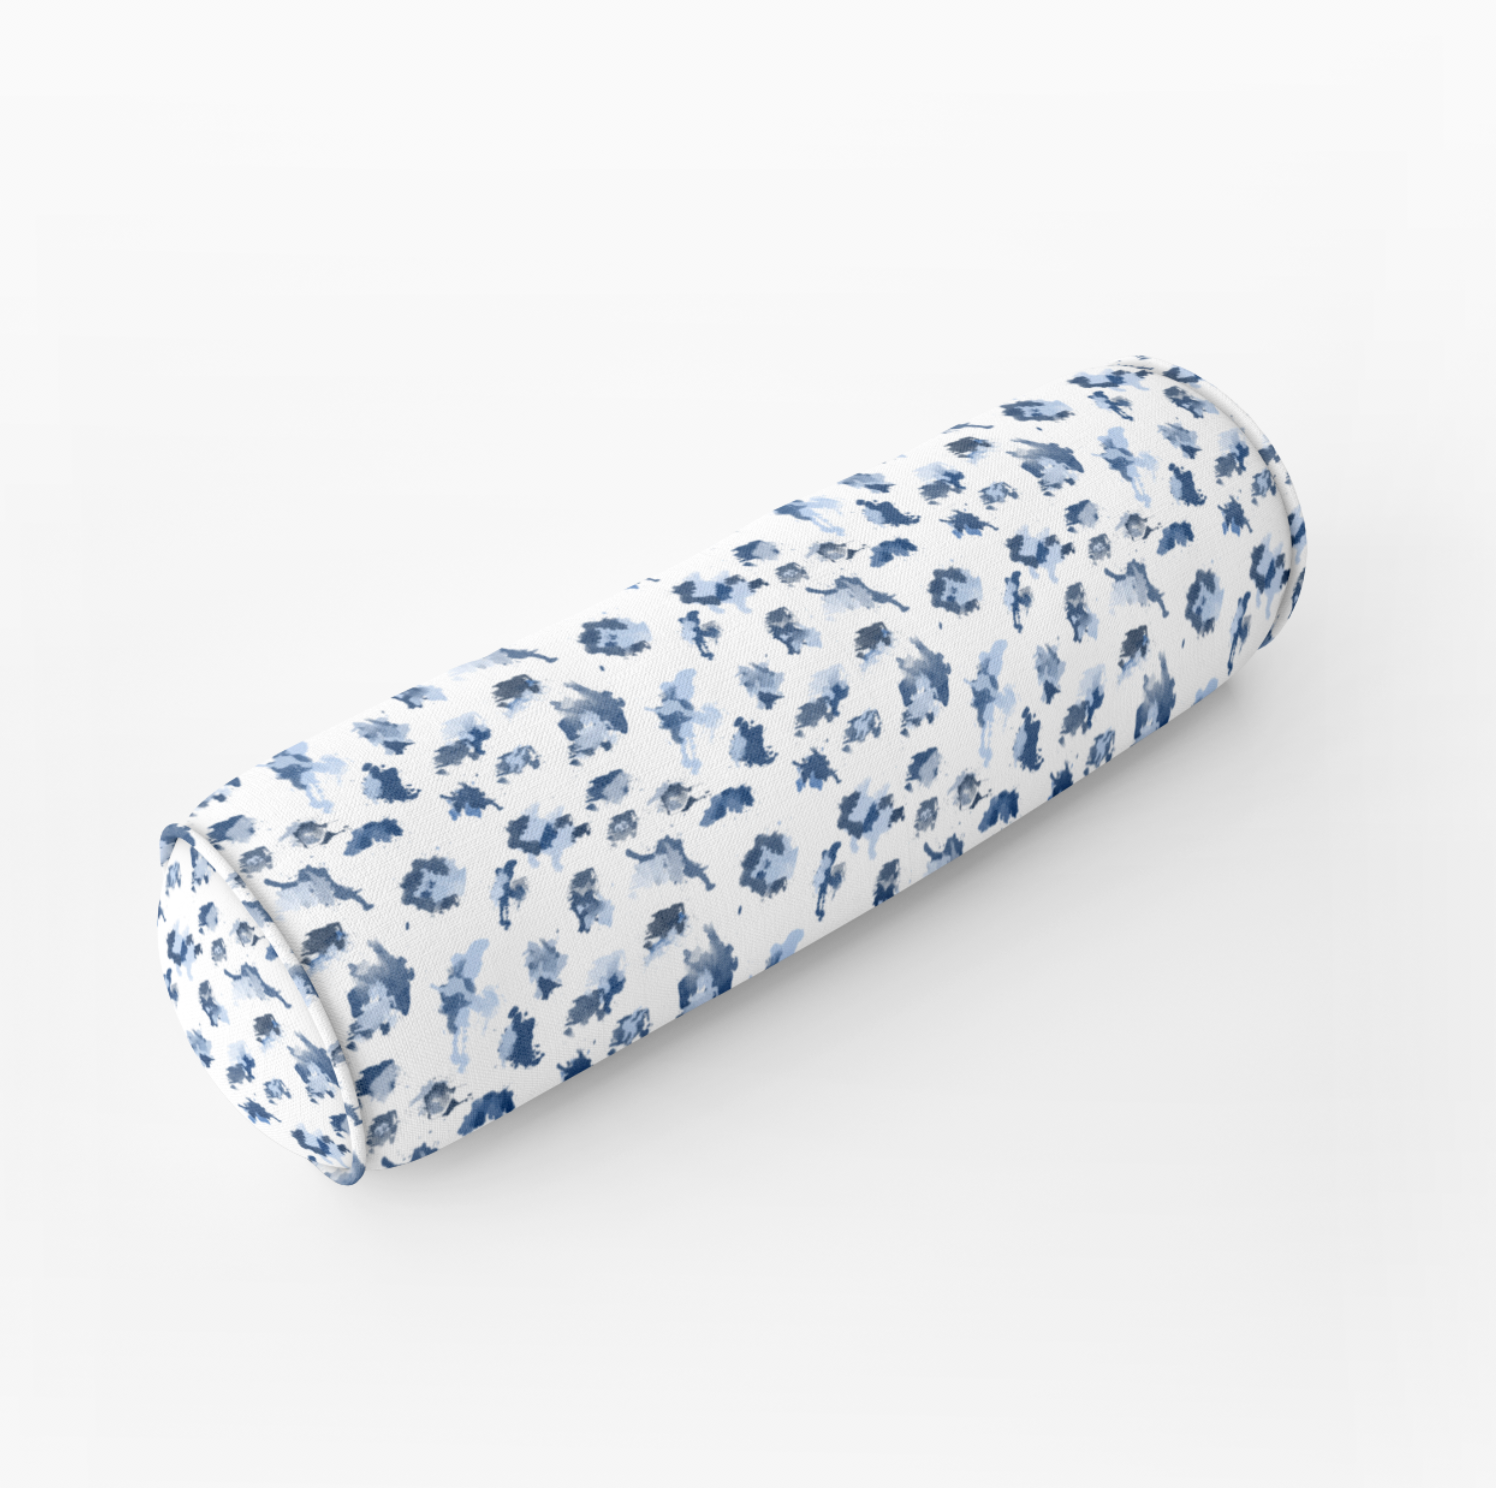 Extra-long Blue White Confetti Embroidered Throw Pillow Cover Bolster Bed  Pillow Couch Pillow Lumbar Pillow Body Pillow 